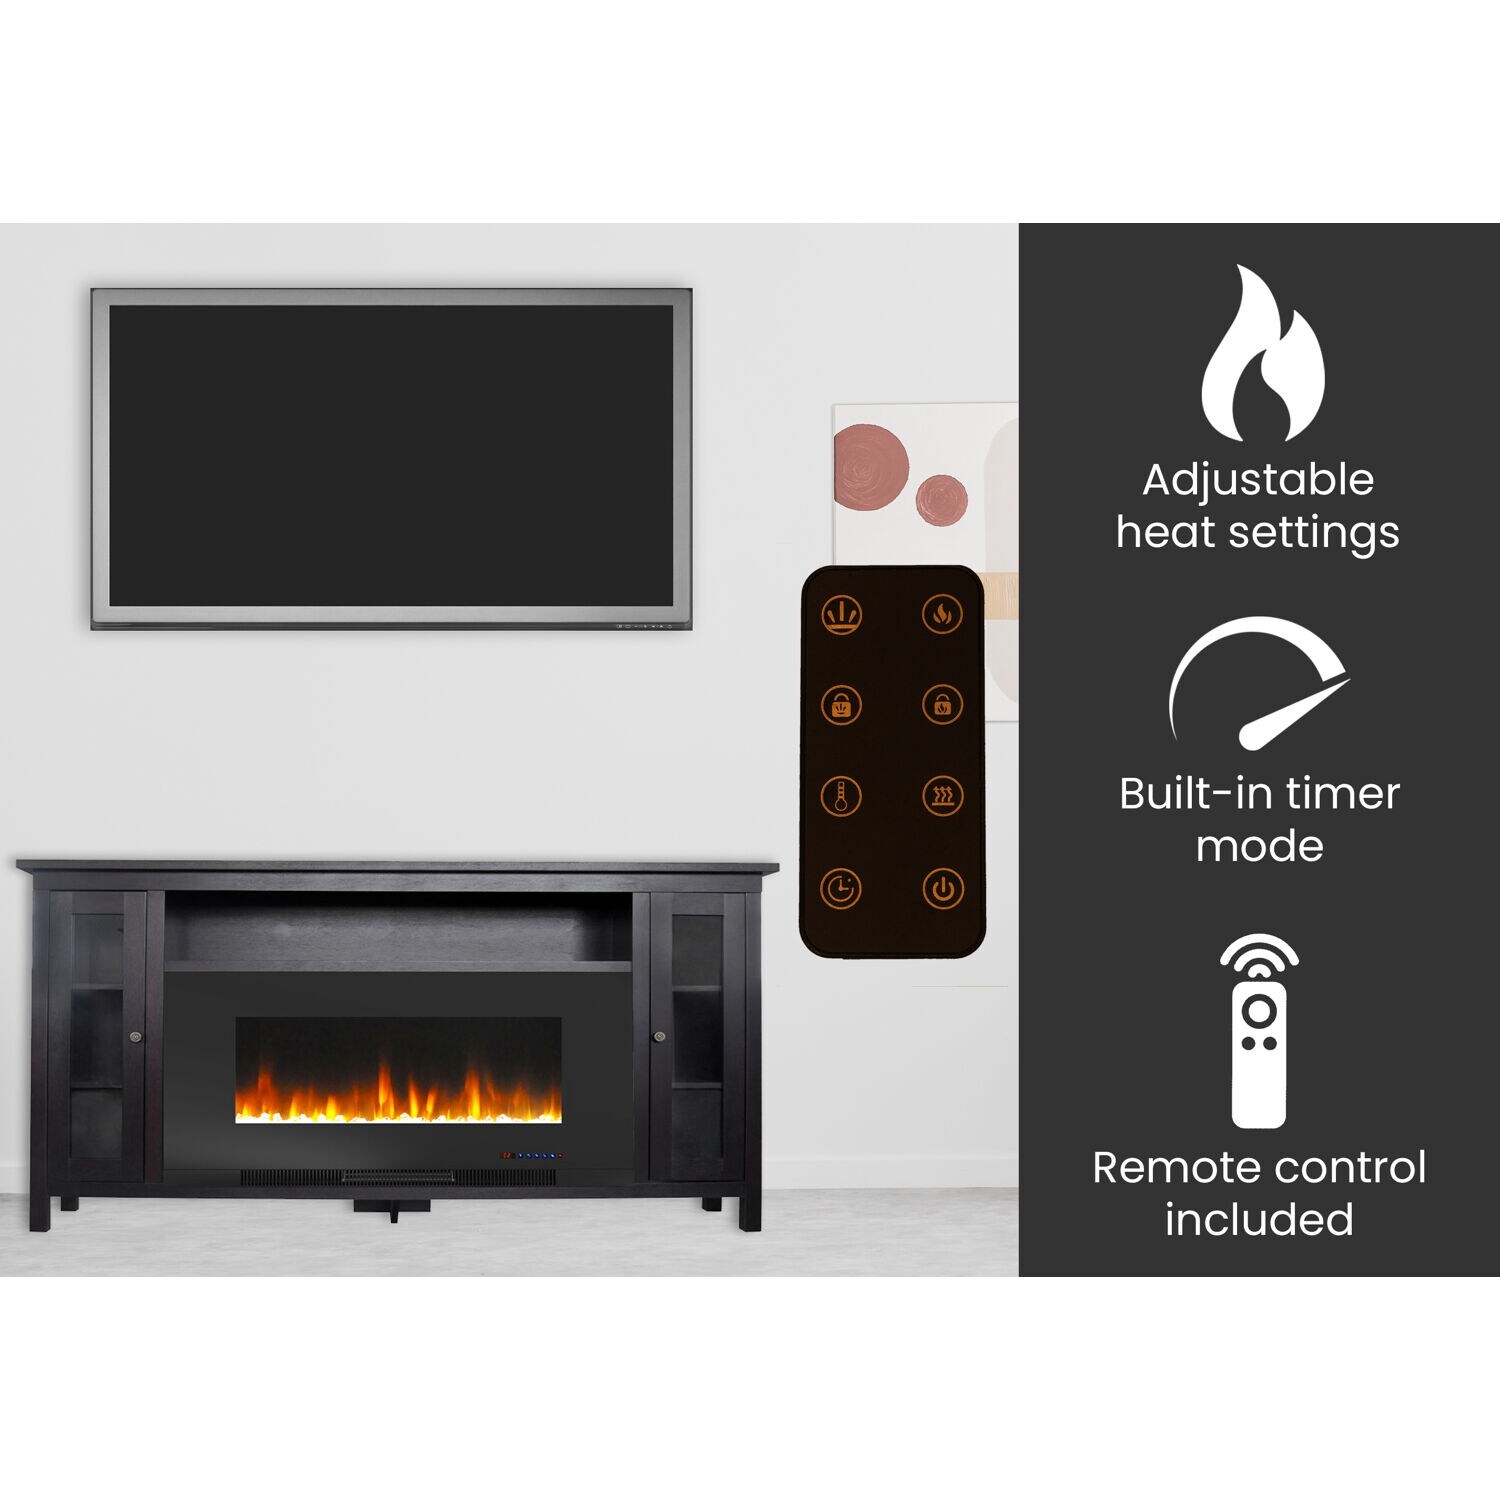 Hanover Brighton Electric Fireplace TV Stand and Color-Changing LED Heater Insert, Dark Coffee